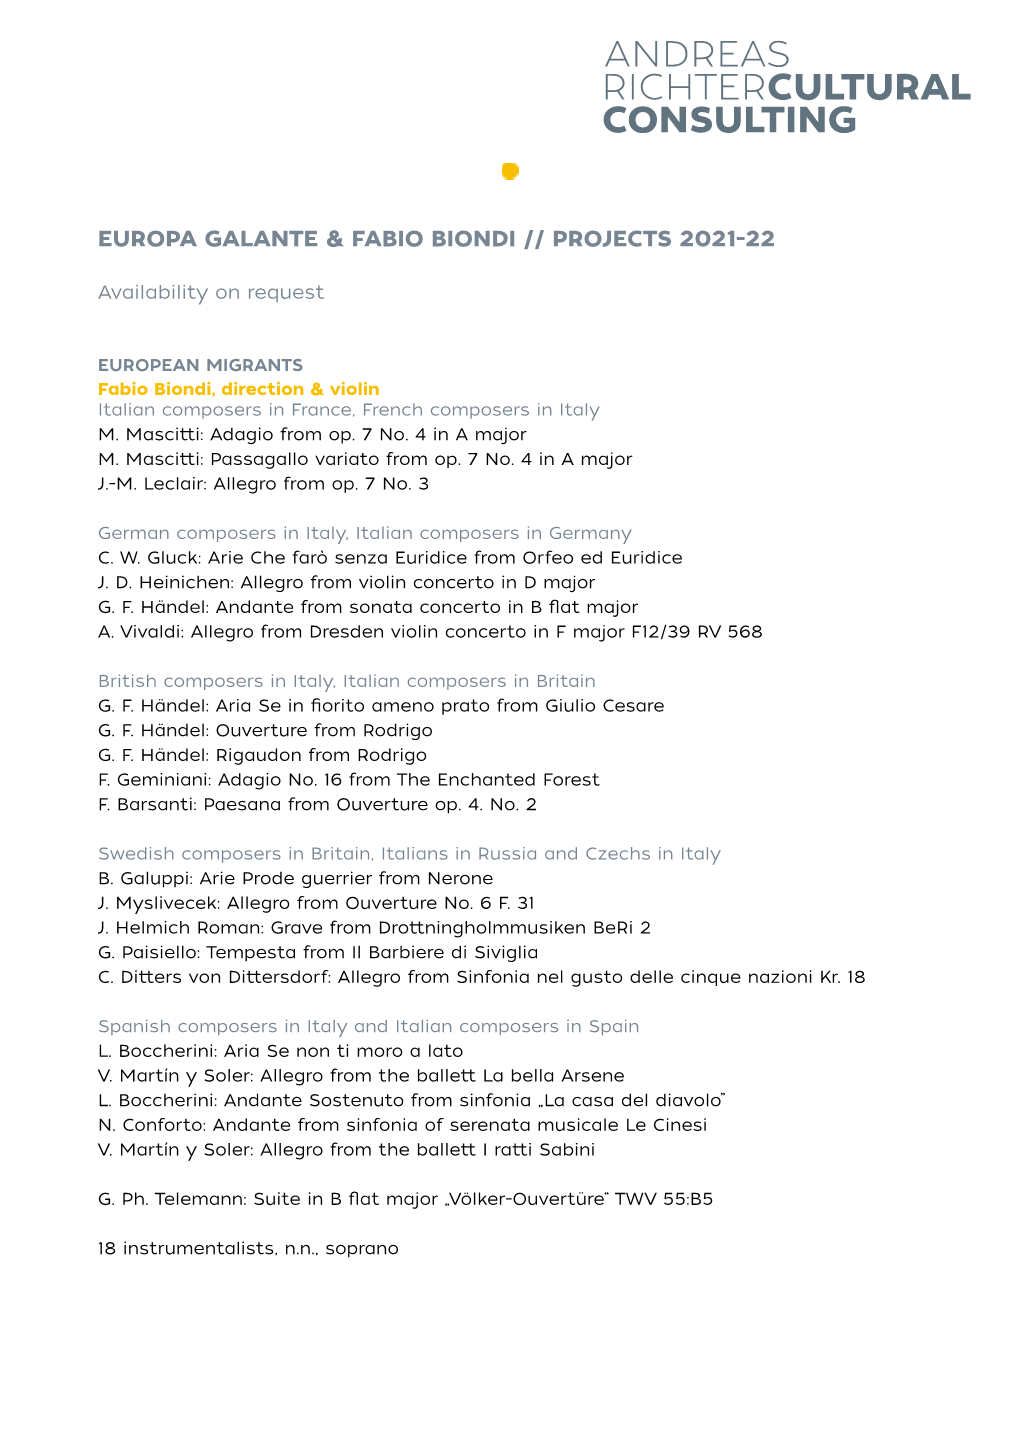 Europa Galante Projects 2021-22